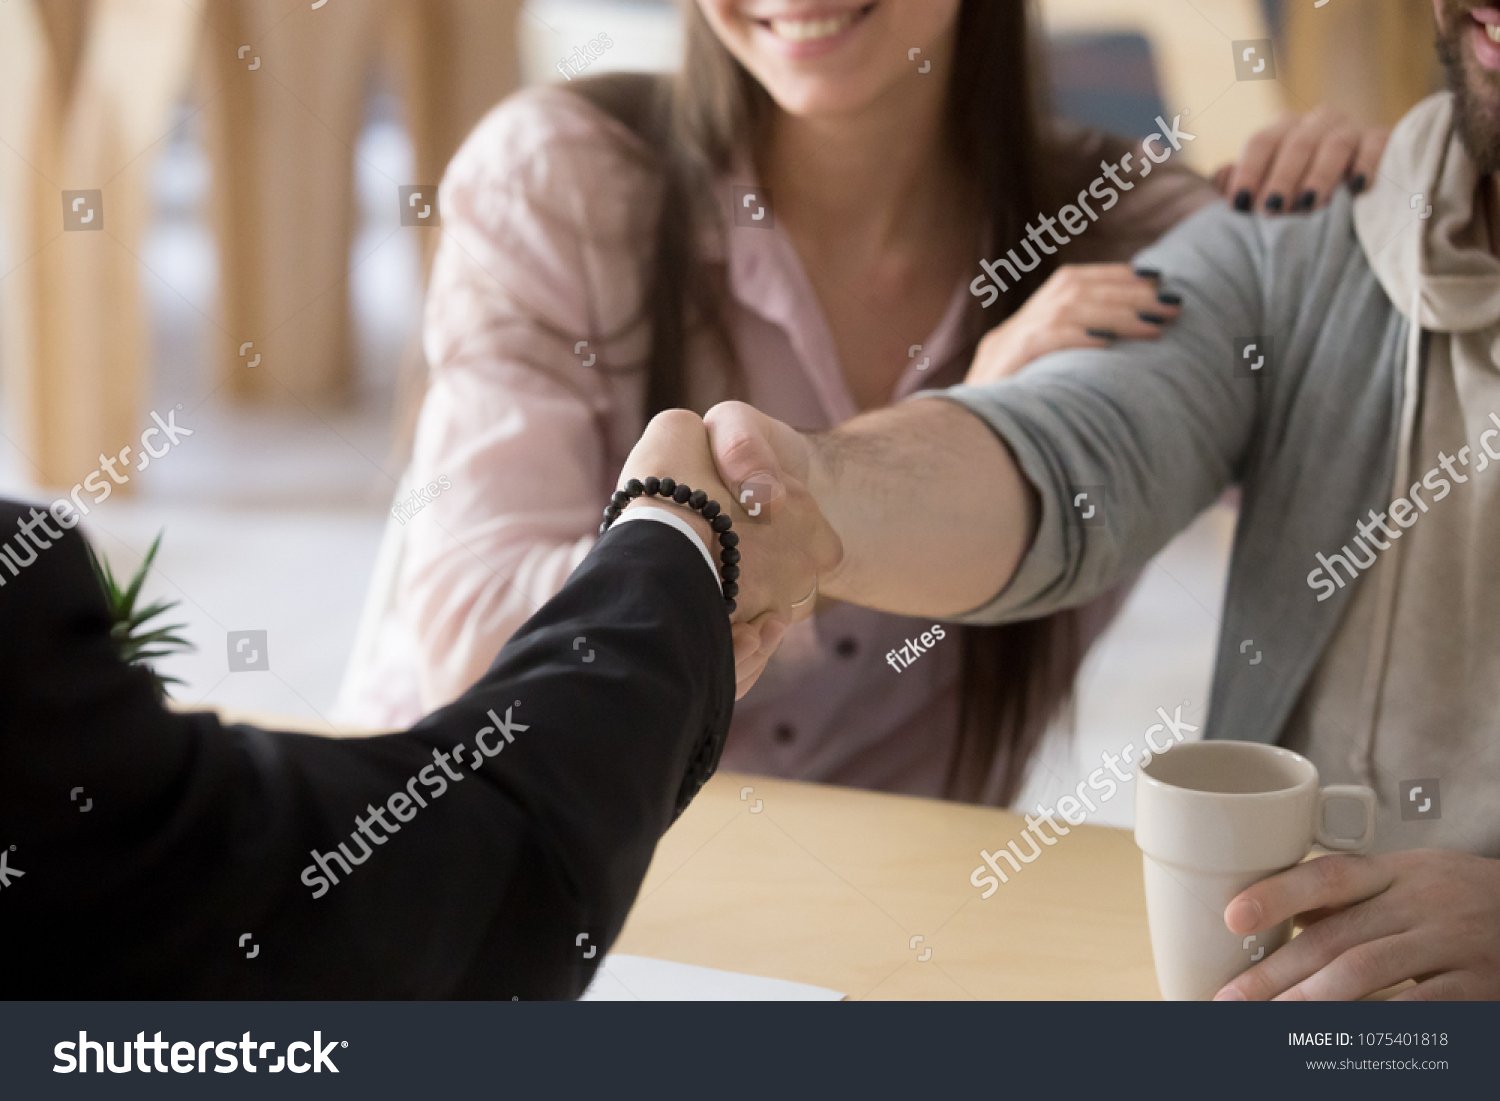 Couple handshaking businessman, smiling customers make successful real estate deal with mortgage broker, lawyer or financial advisor, buying insurance, taking bank loan, close up view of hands shake #1075401818